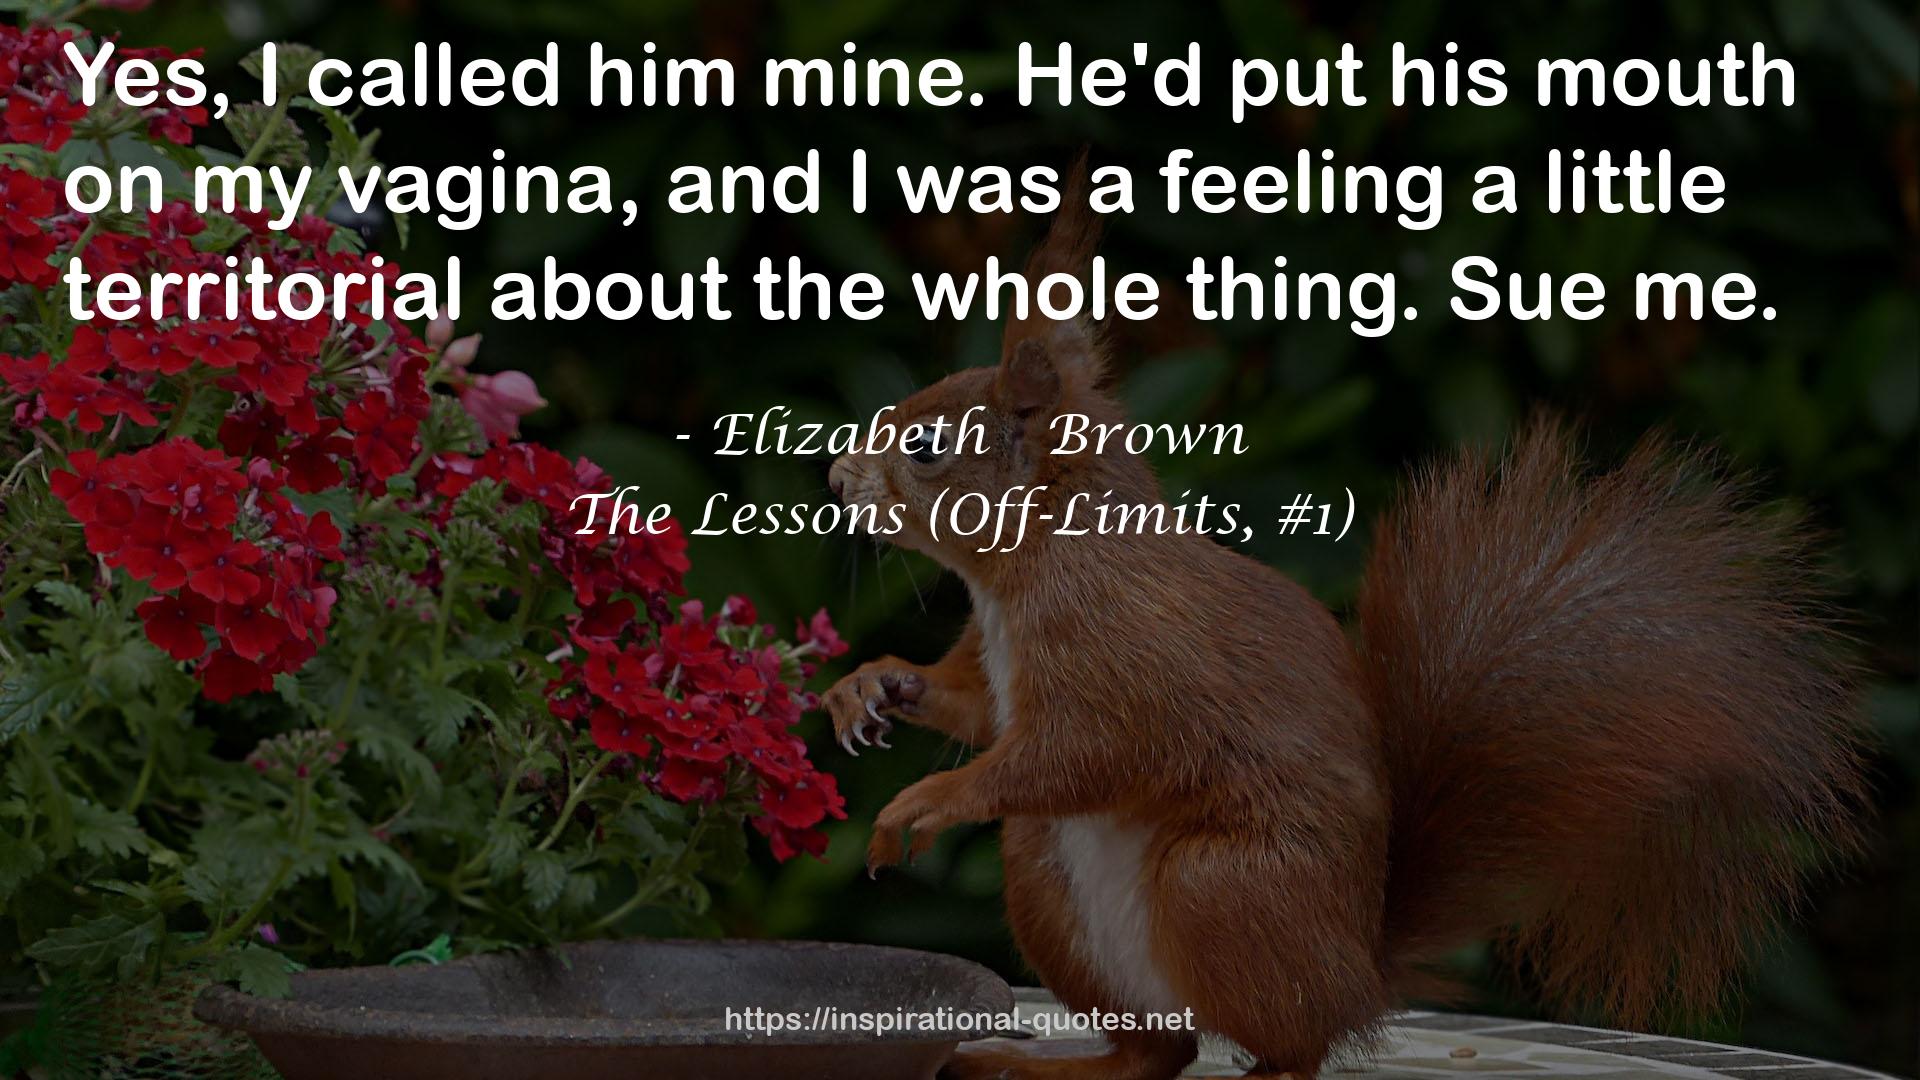 The Lessons (Off-Limits, #1) QUOTES